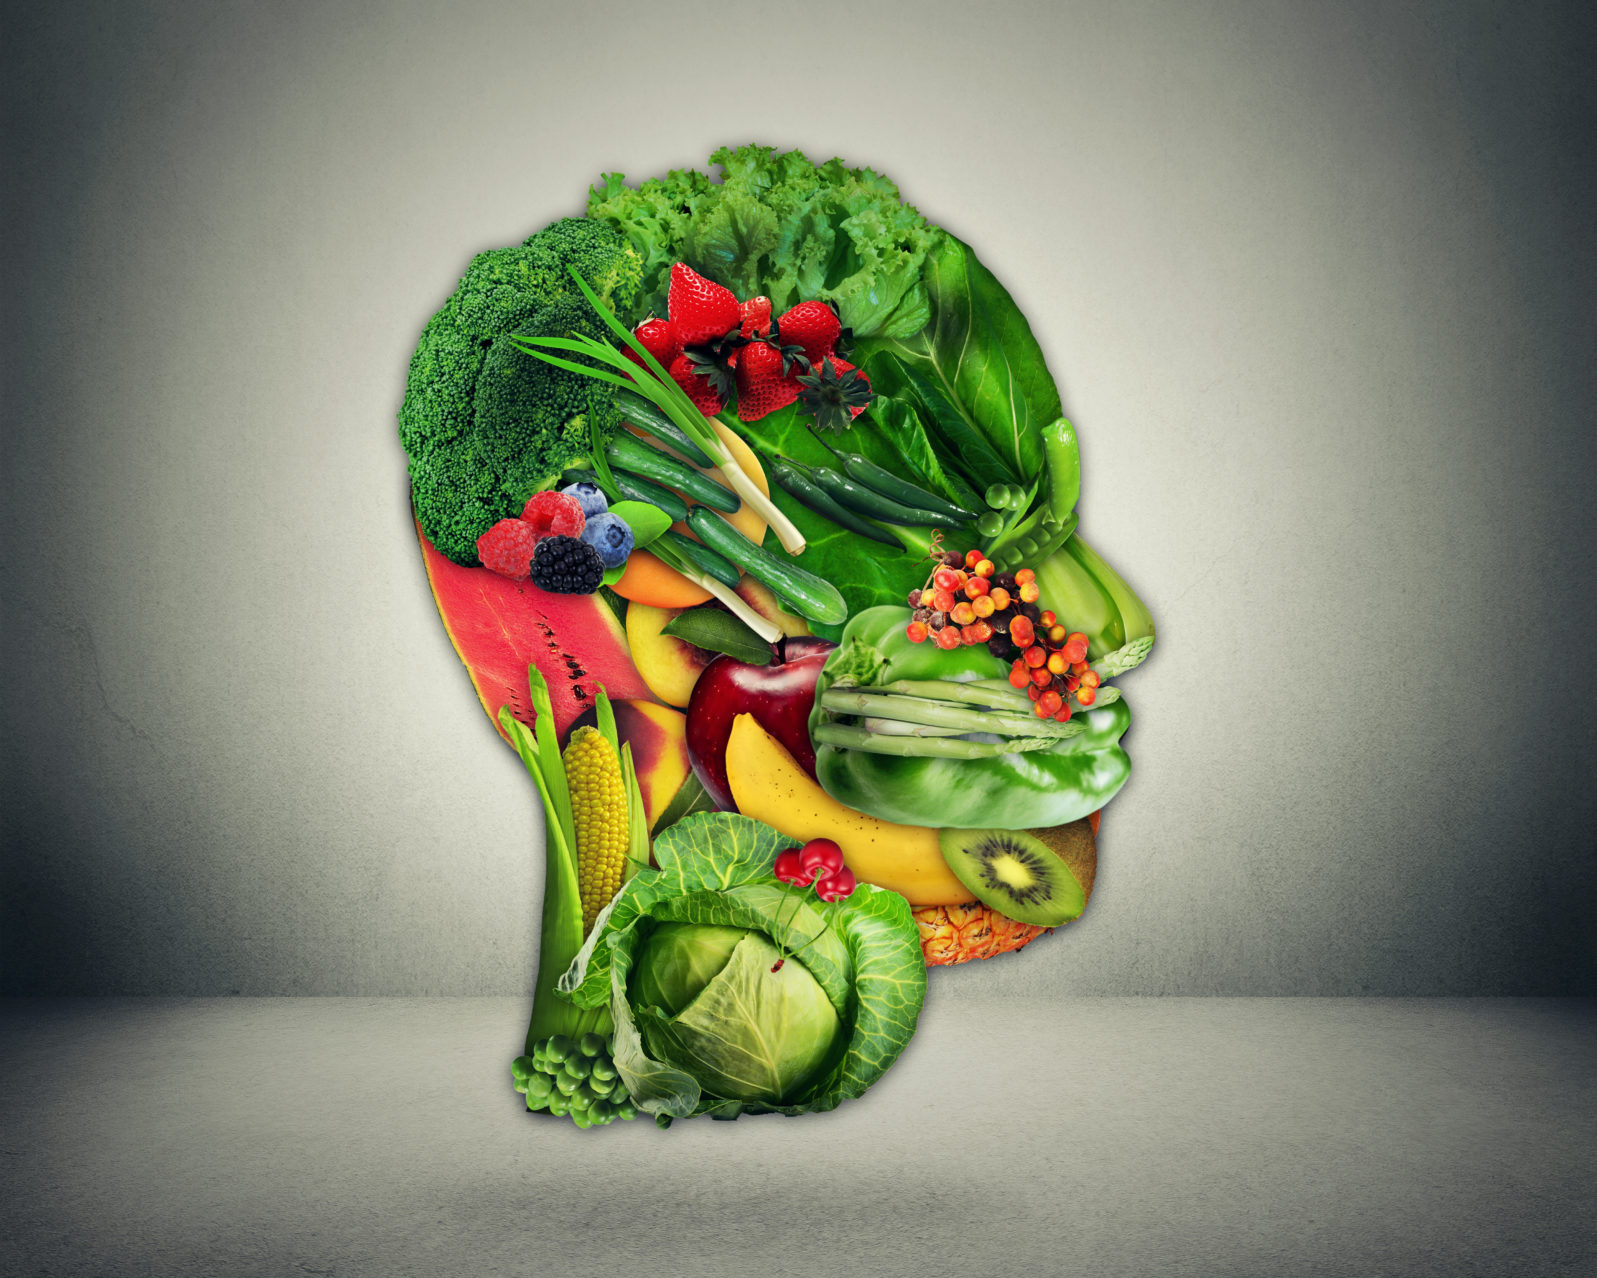 Healthy lifestyle choice. Fresh vegetables and fruit shaped as human head